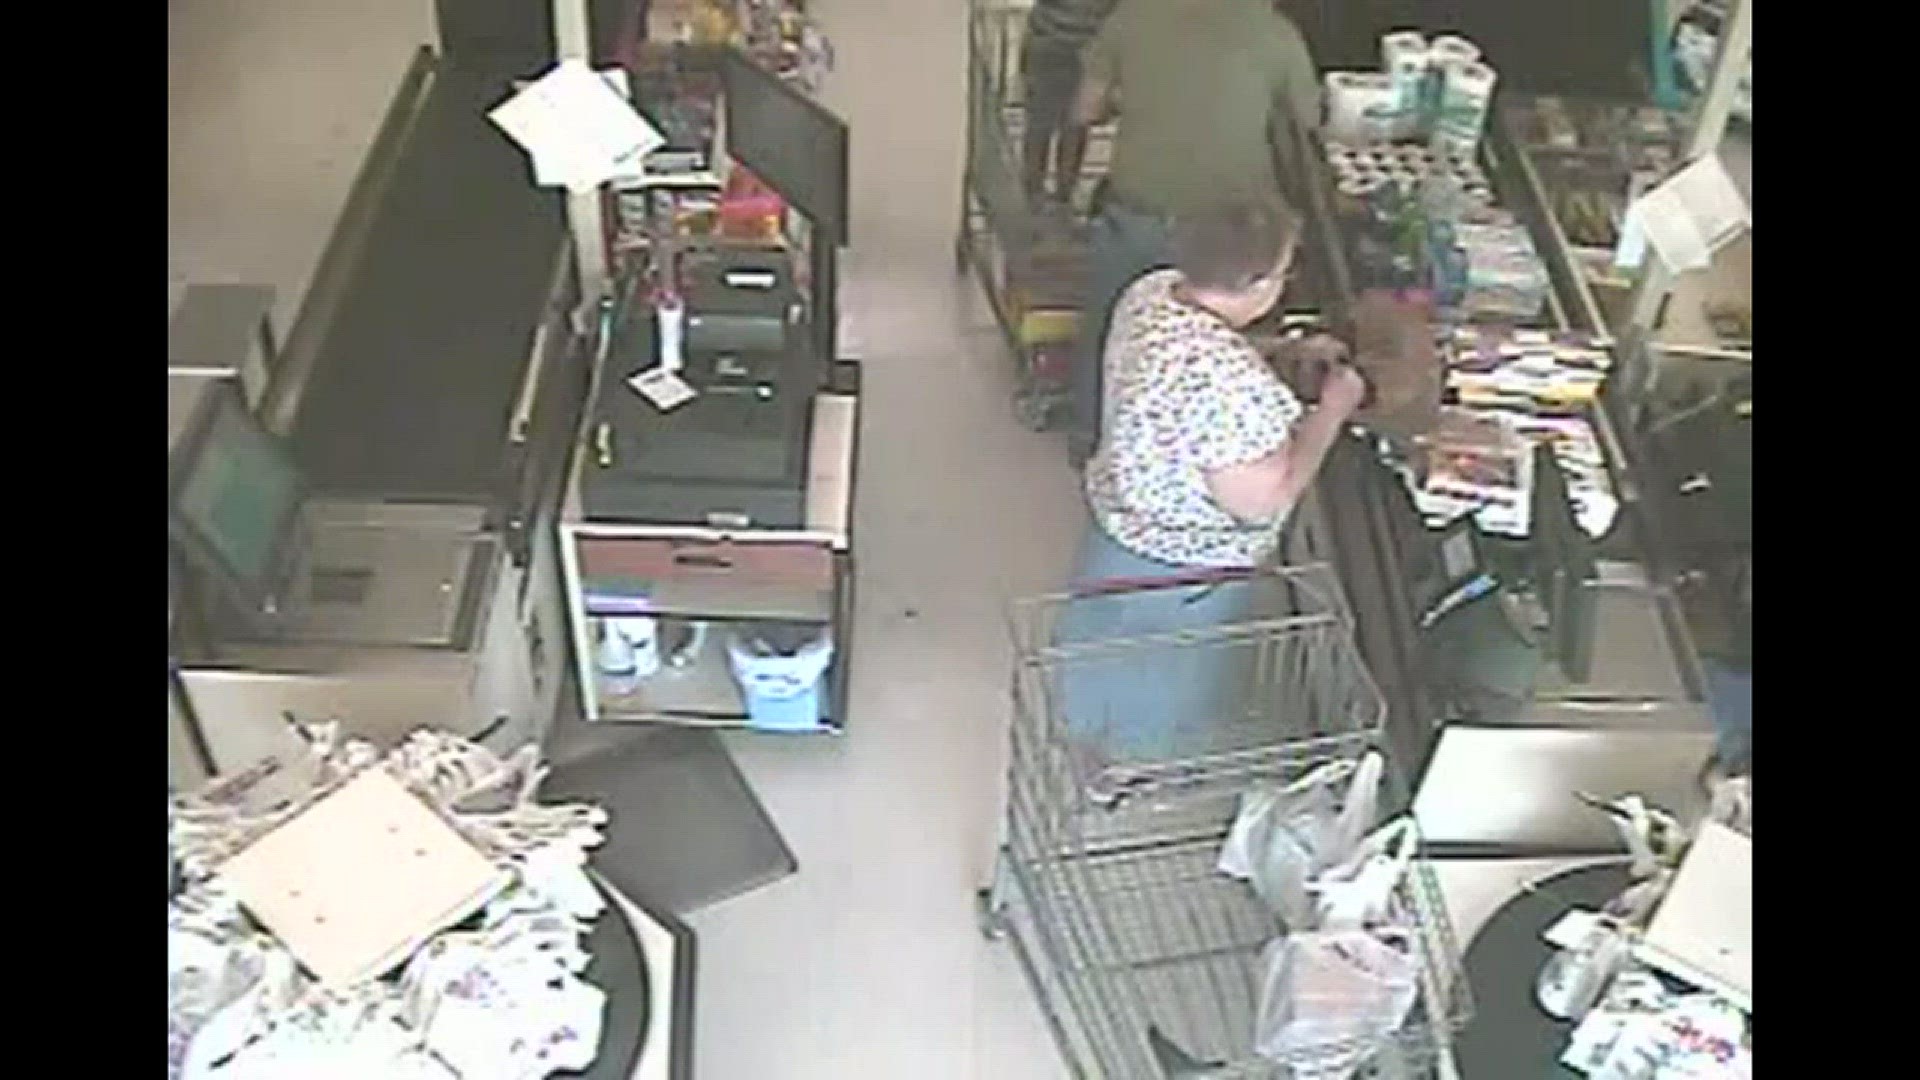 TBI released new surveillance video showing Carlie Trent and her uncle, Gary Simpson, at Save-A-Lot on May 4, 2016